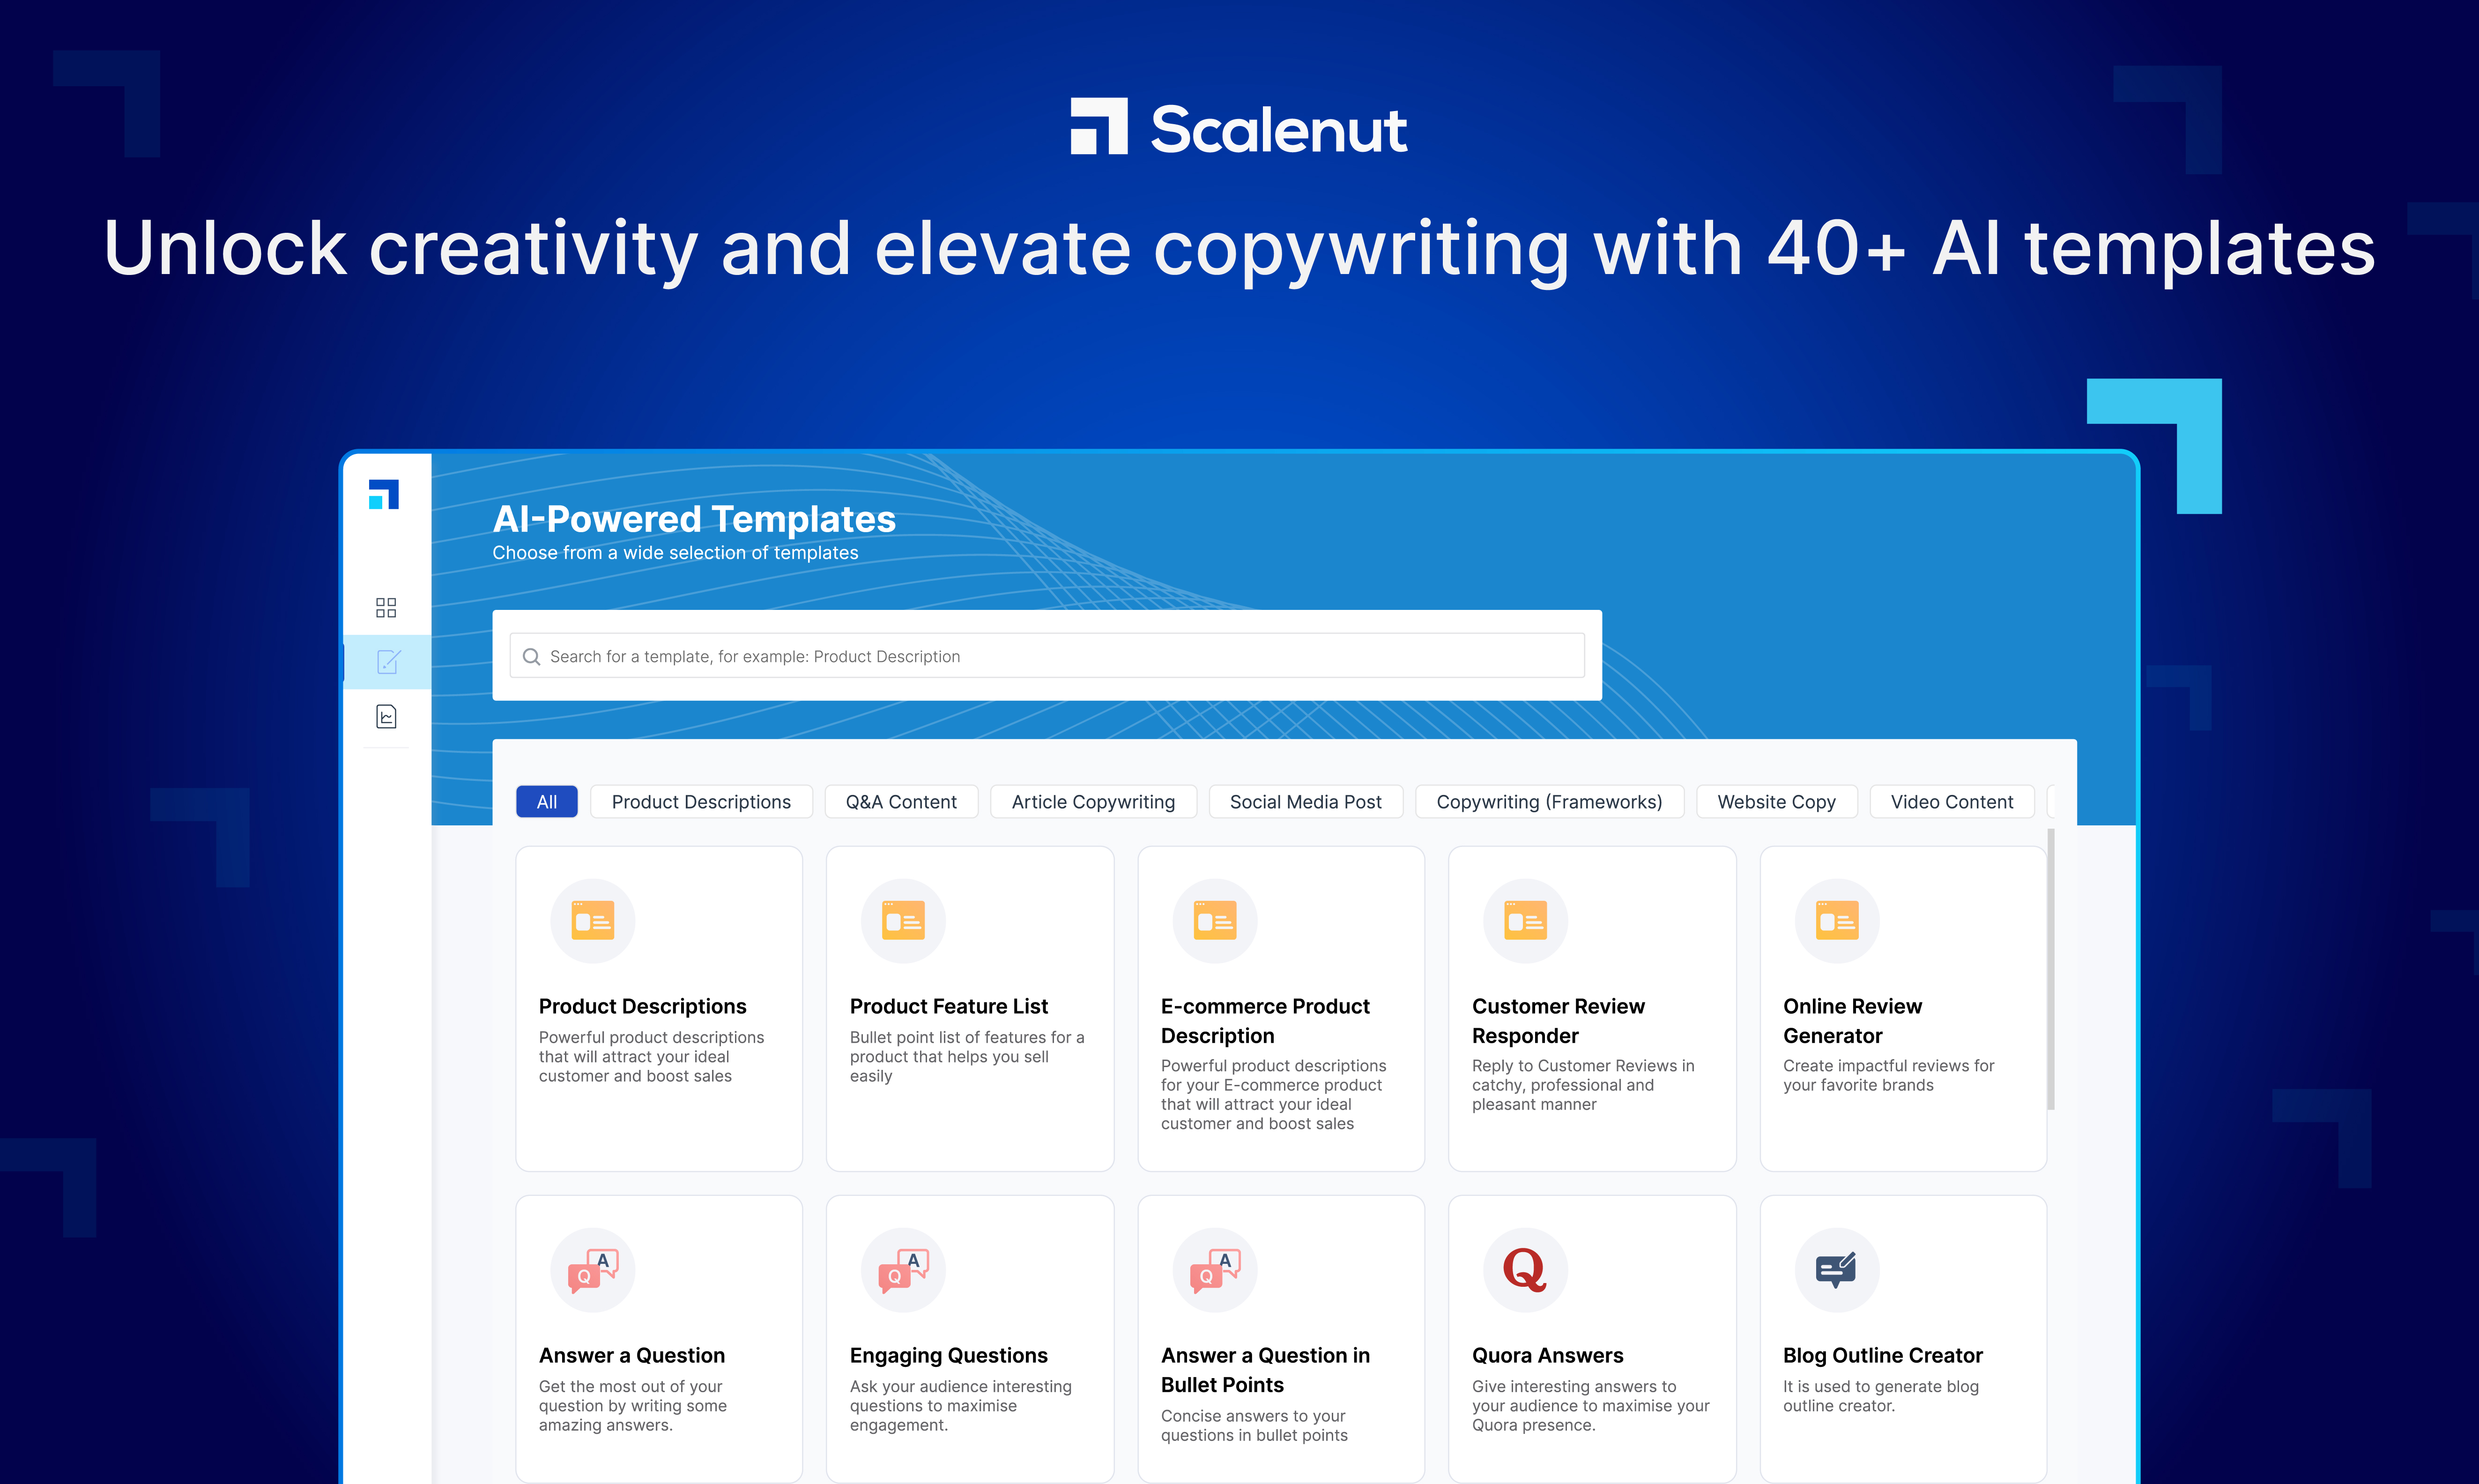 Unlock creativity and elevate copywriting with 40+ AI templates